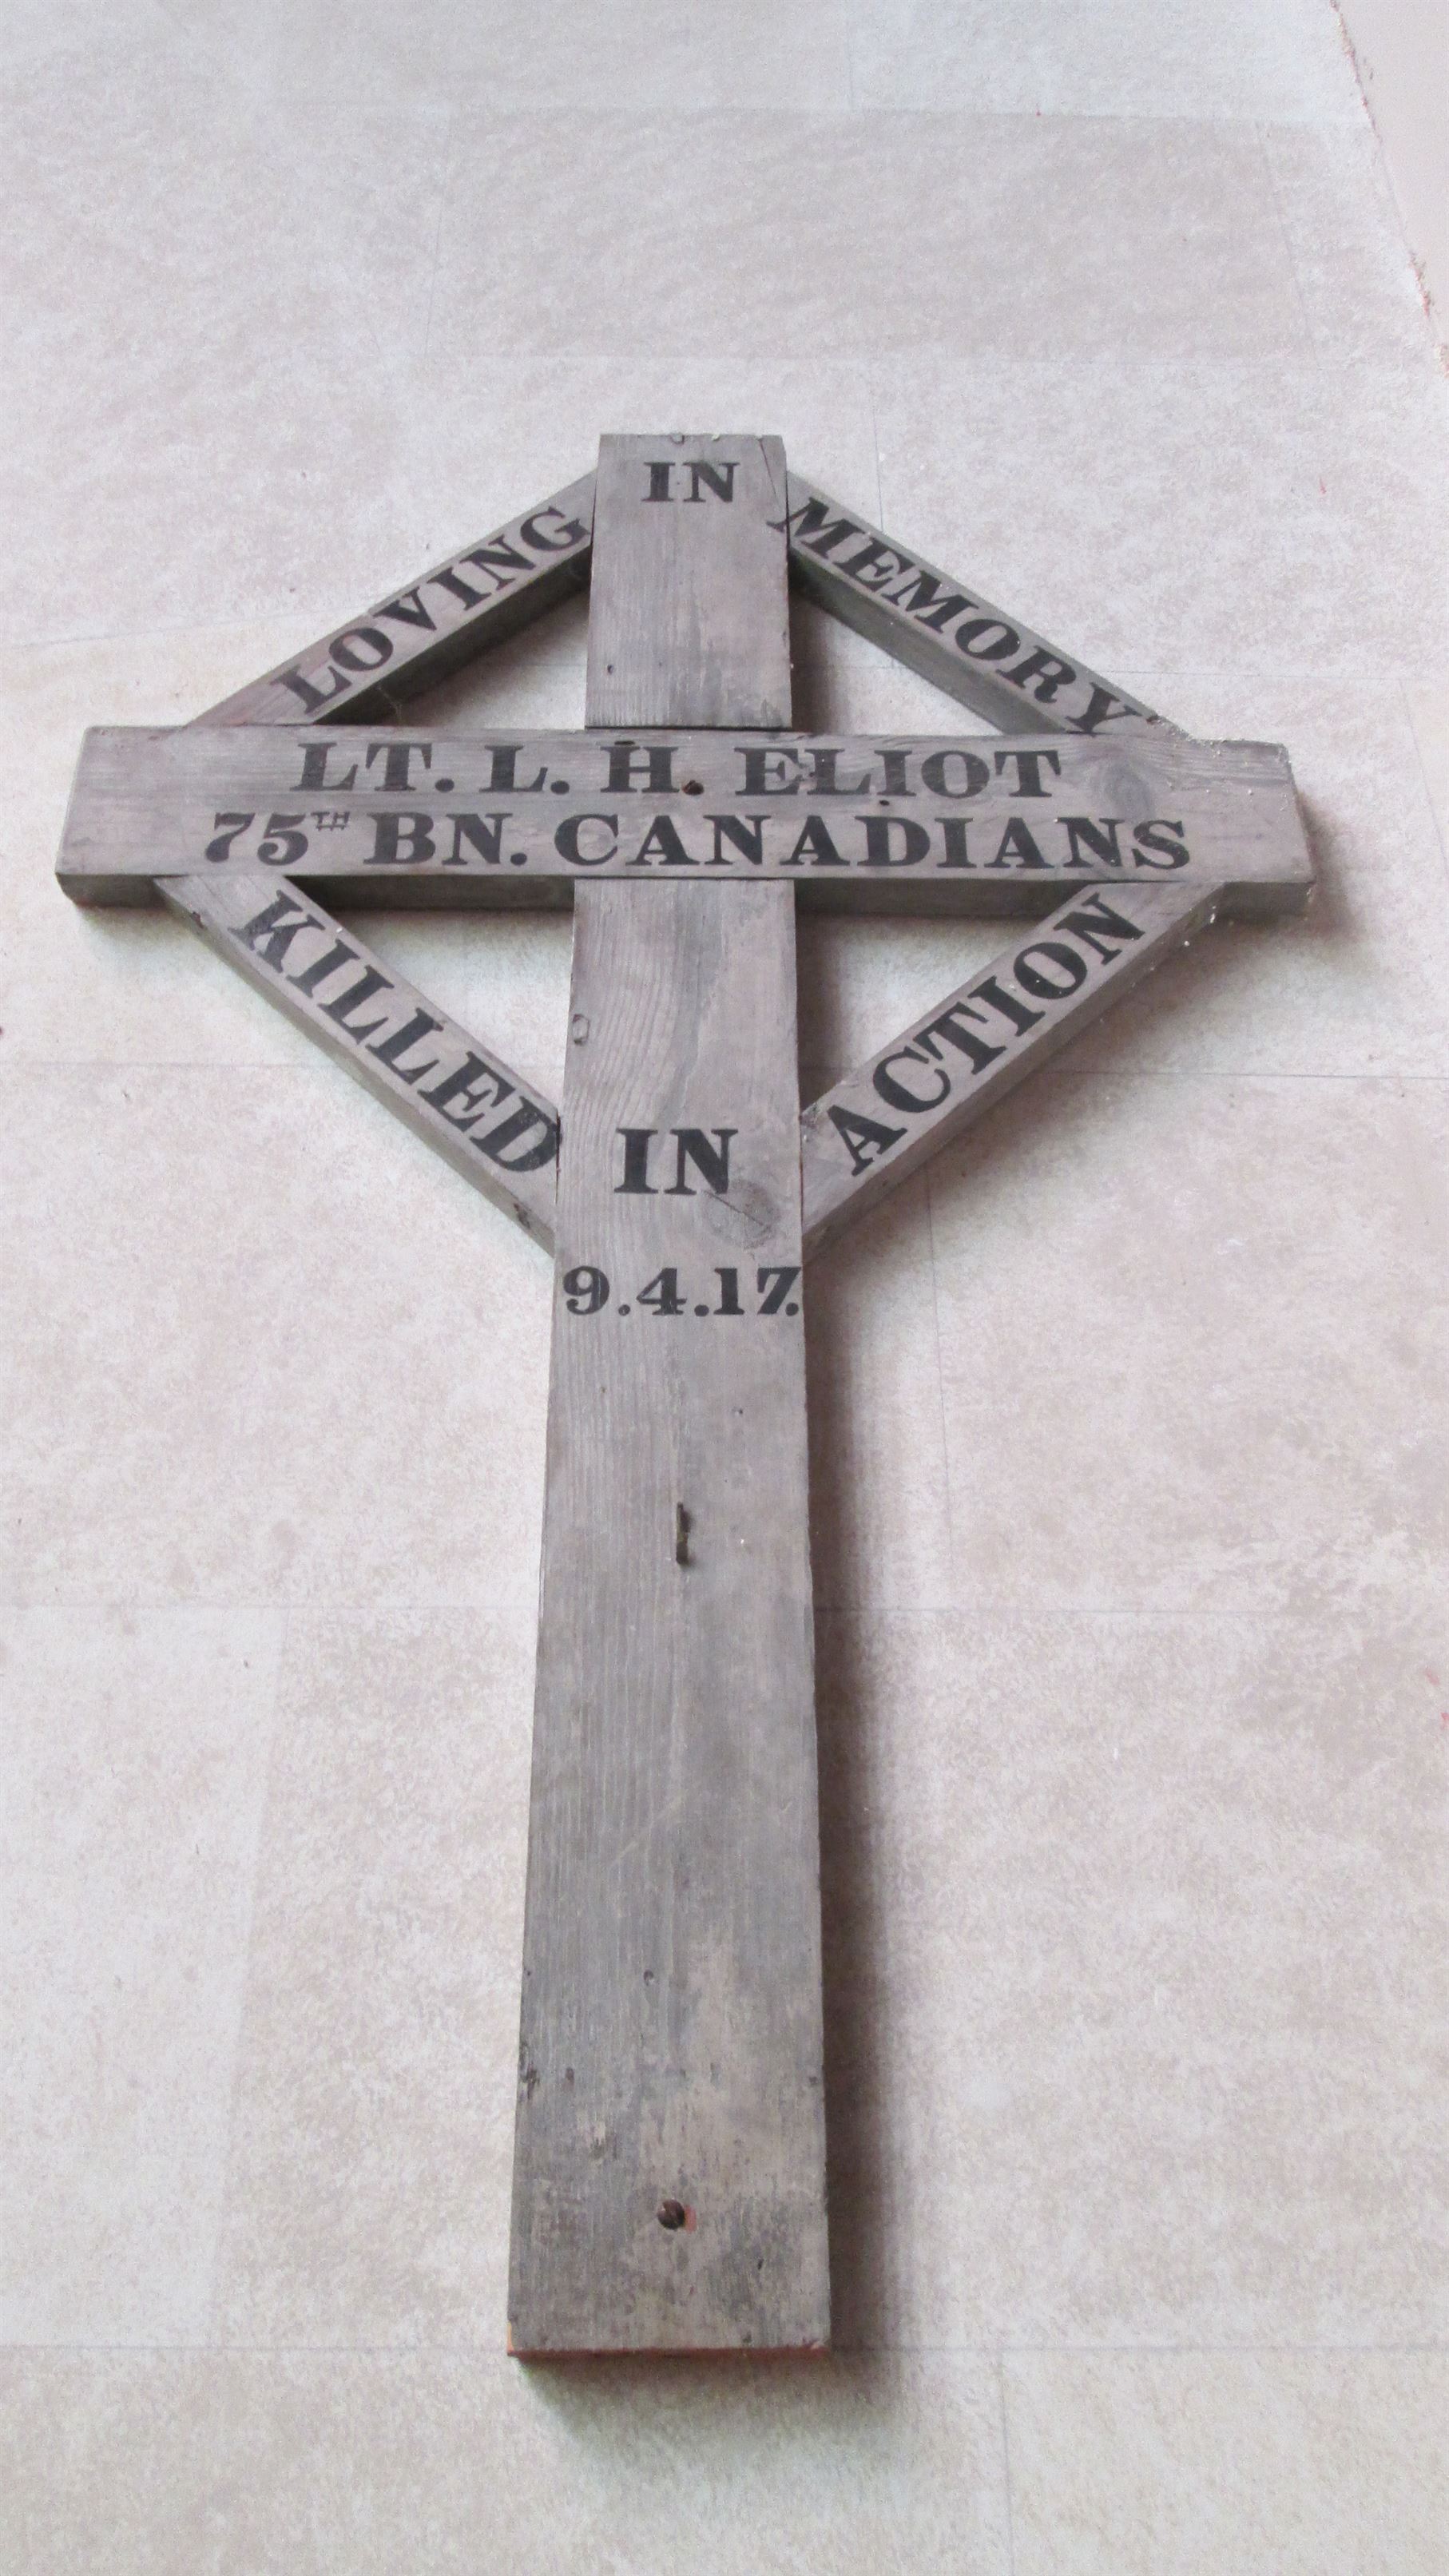 Photo 2- Close up of cross (photo by R. Turcotte)